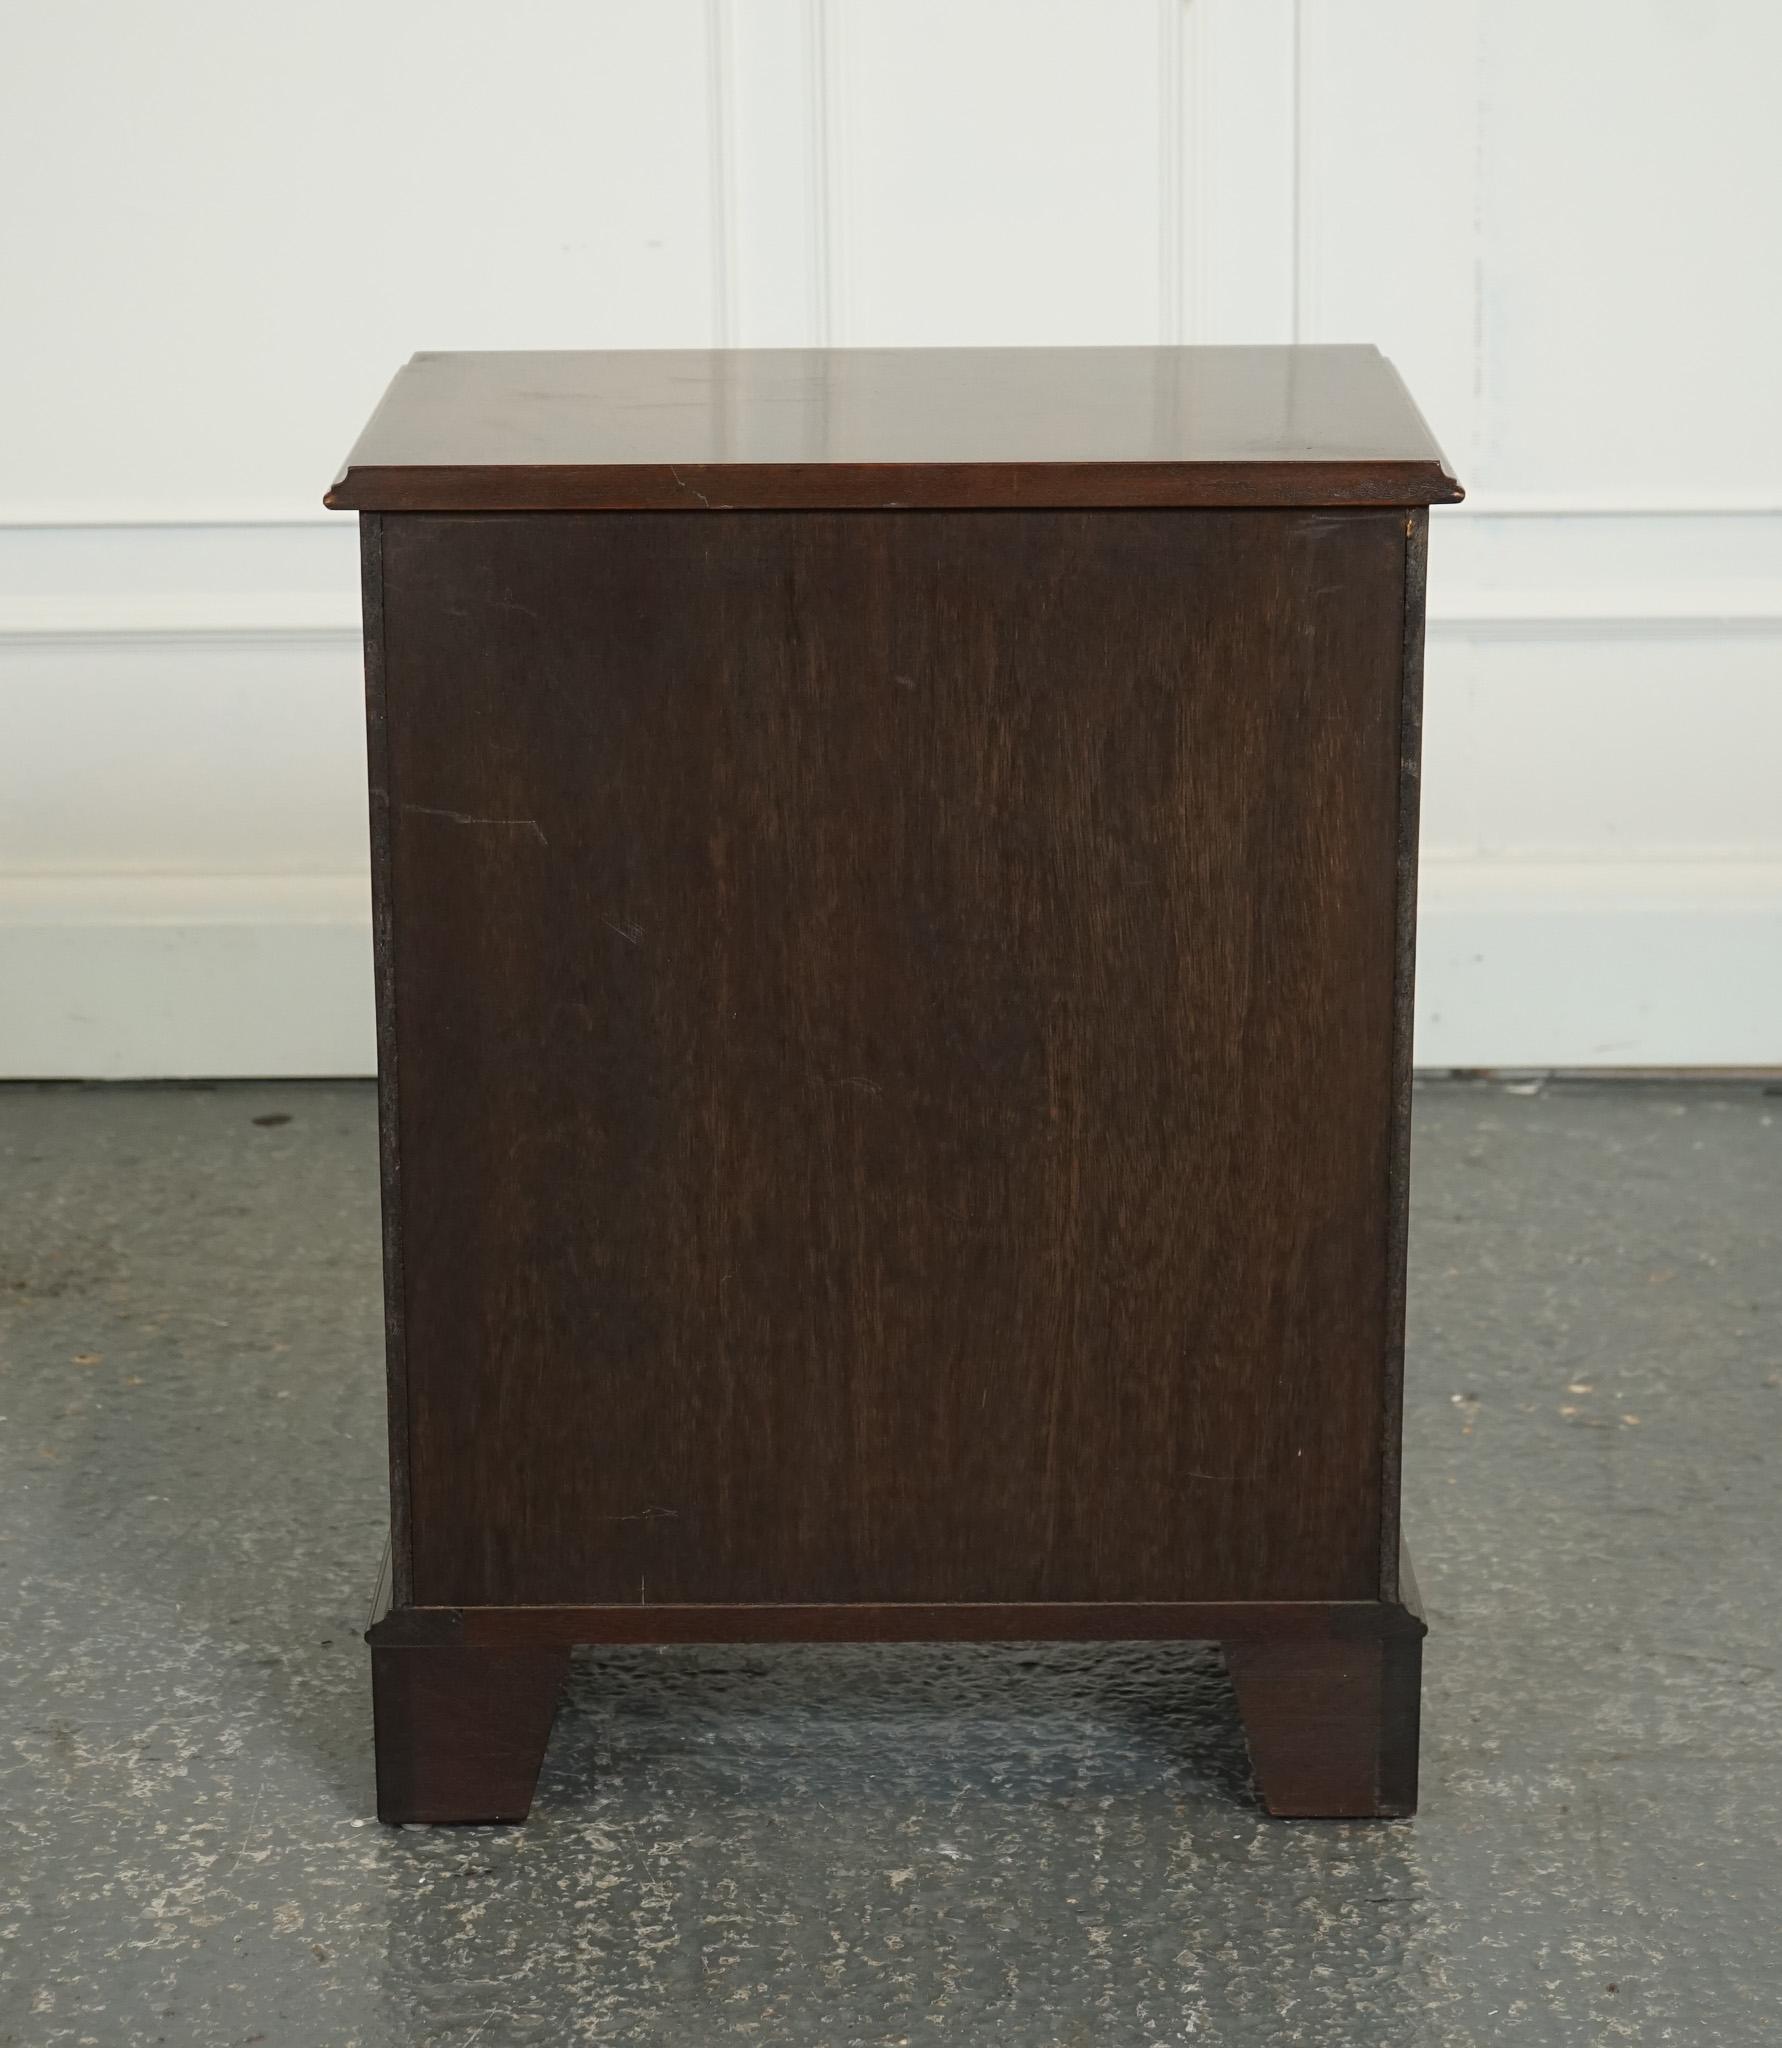 Hardwood LOVELY GEORGIAN STYLE SMALL CHEST OF DRAWERS SiDE TABLE WITH BUTLER TRAY J1 For Sale